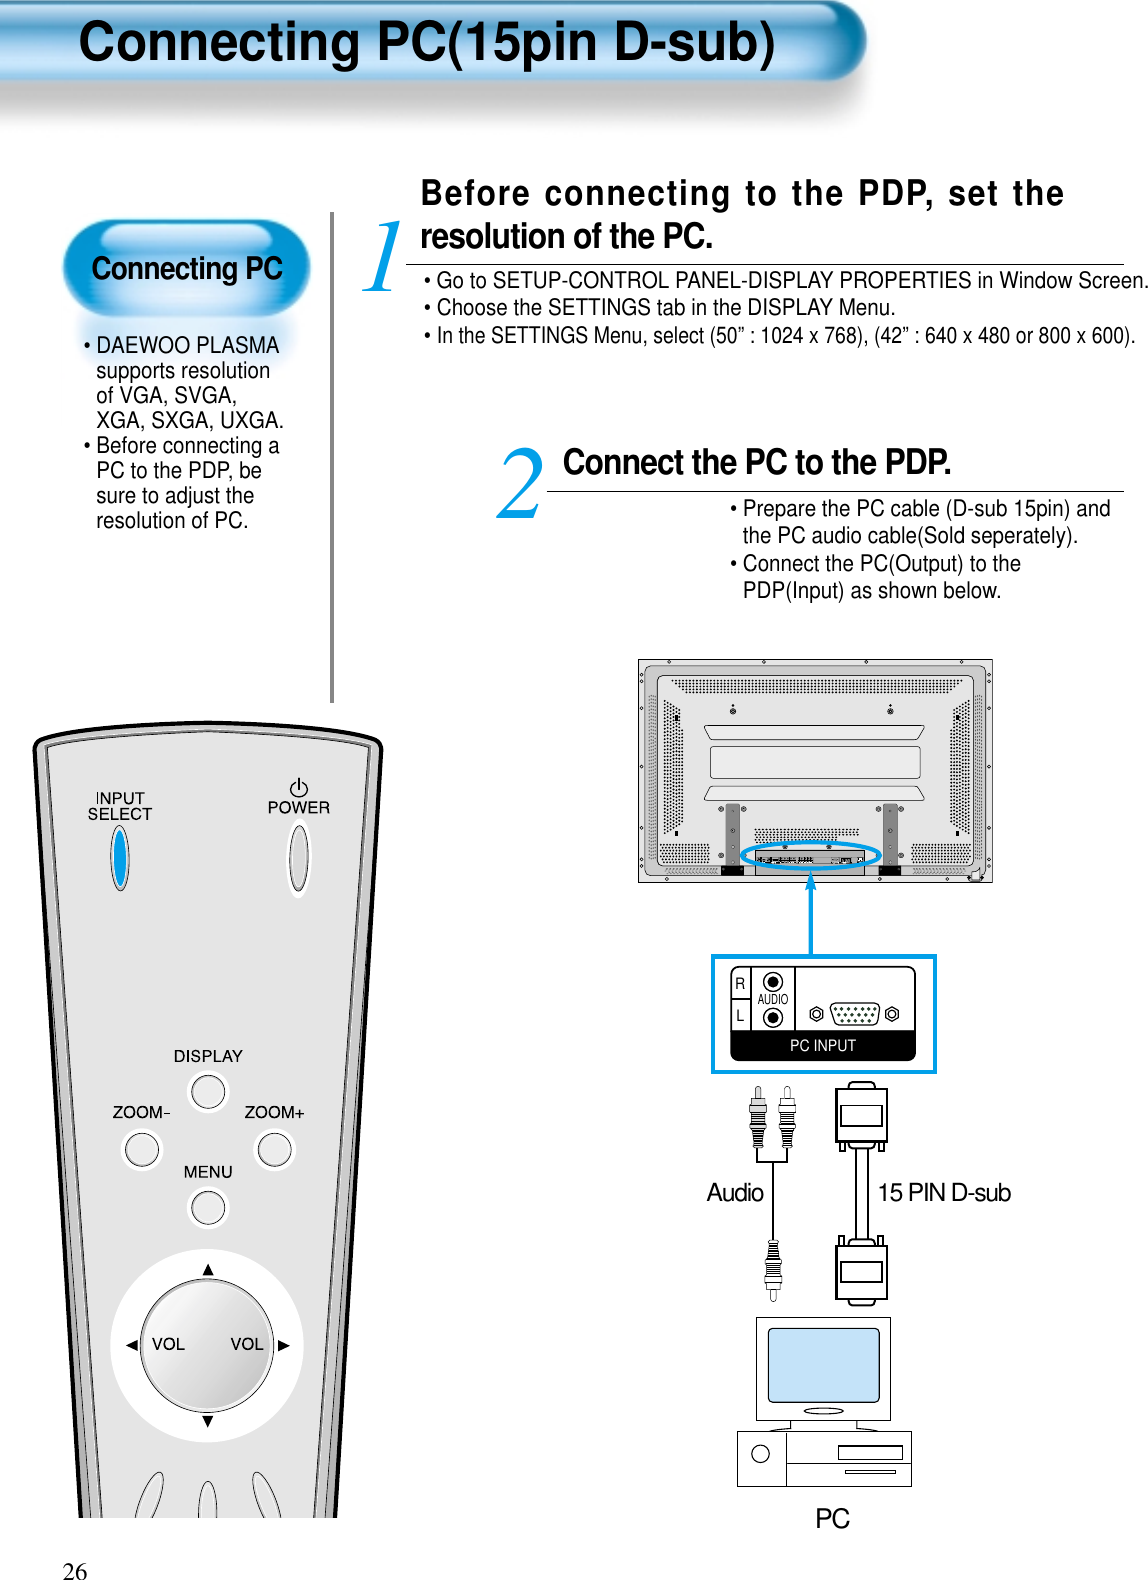 Connecting PC• DAEWOO PLASMAsupports resolutionof VGA, SVGA,XGA, SXGA, UXGA.• Before connecting aPC to the PDP, besure to adjust theresolution of PC.Connecting PC(15pin D-sub)26Connect the PC to the PDP.• Prepare the PC cable (D-sub 15pin) andthe PC audio cable(Sold seperately).• Connect the PC(Output) to thePDP(Input) as shown below. 2Before connecting to the PDP, set theresolution of the PC.• Go to SETUP-CONTROL PANEL-DISPLAY PROPERTIES in Window Screen.• Choose the SETTINGS tab in the DISPLAY Menu.• In the SETTINGS Menu, select (50” : 1024 x 768), (42” : 640 x 480 or 800 x 600).1PC INPUTLRAUDIO15 PIN D-subAudioPC